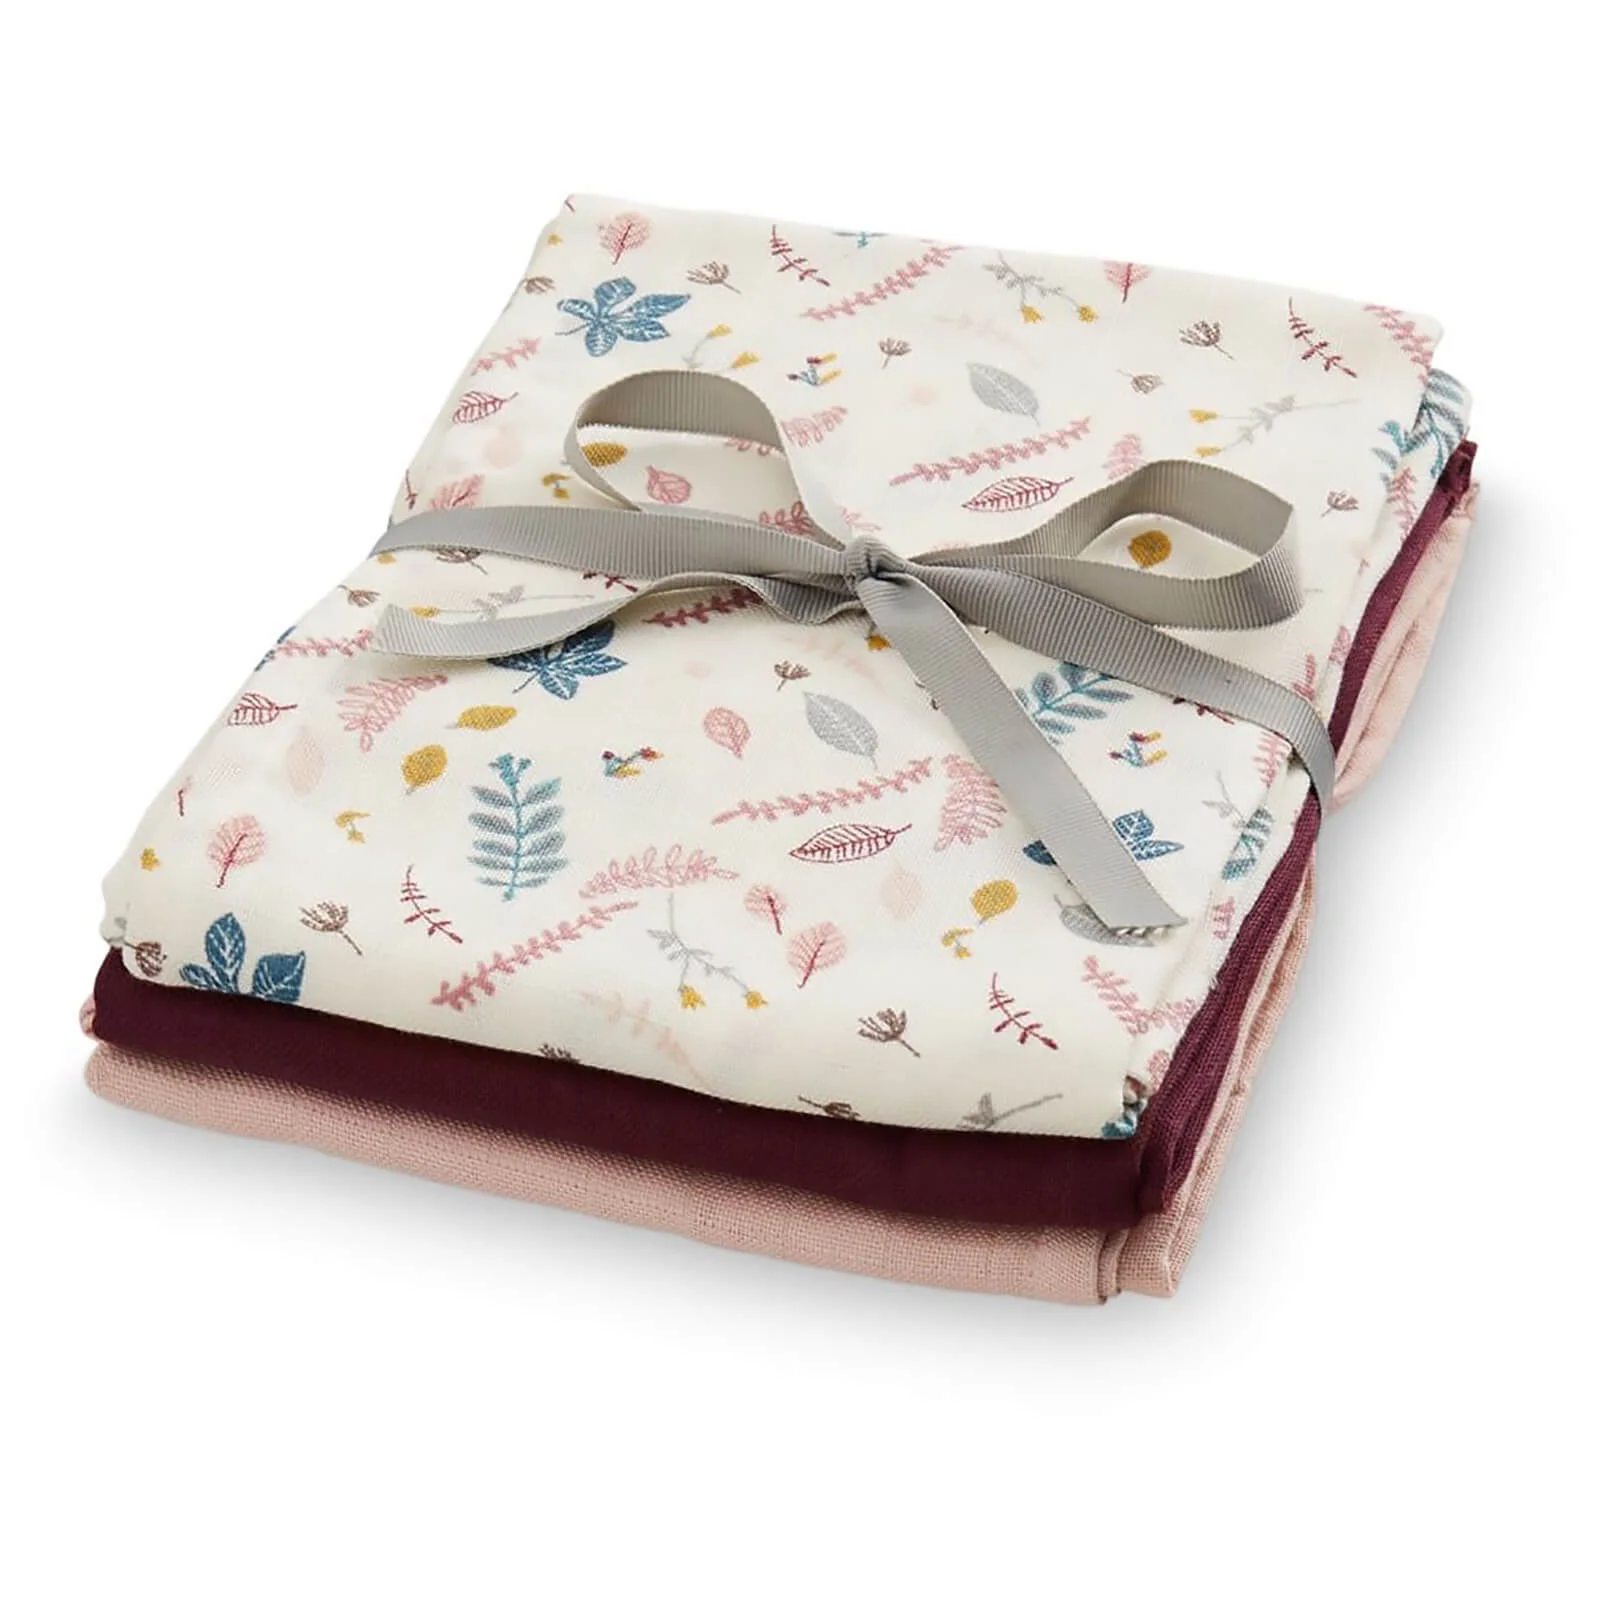 Cam Cam Muslin Cloth - Pressed Leaves Rose, Bordeaux, Blossom Pink (Pack of 3) Image 1